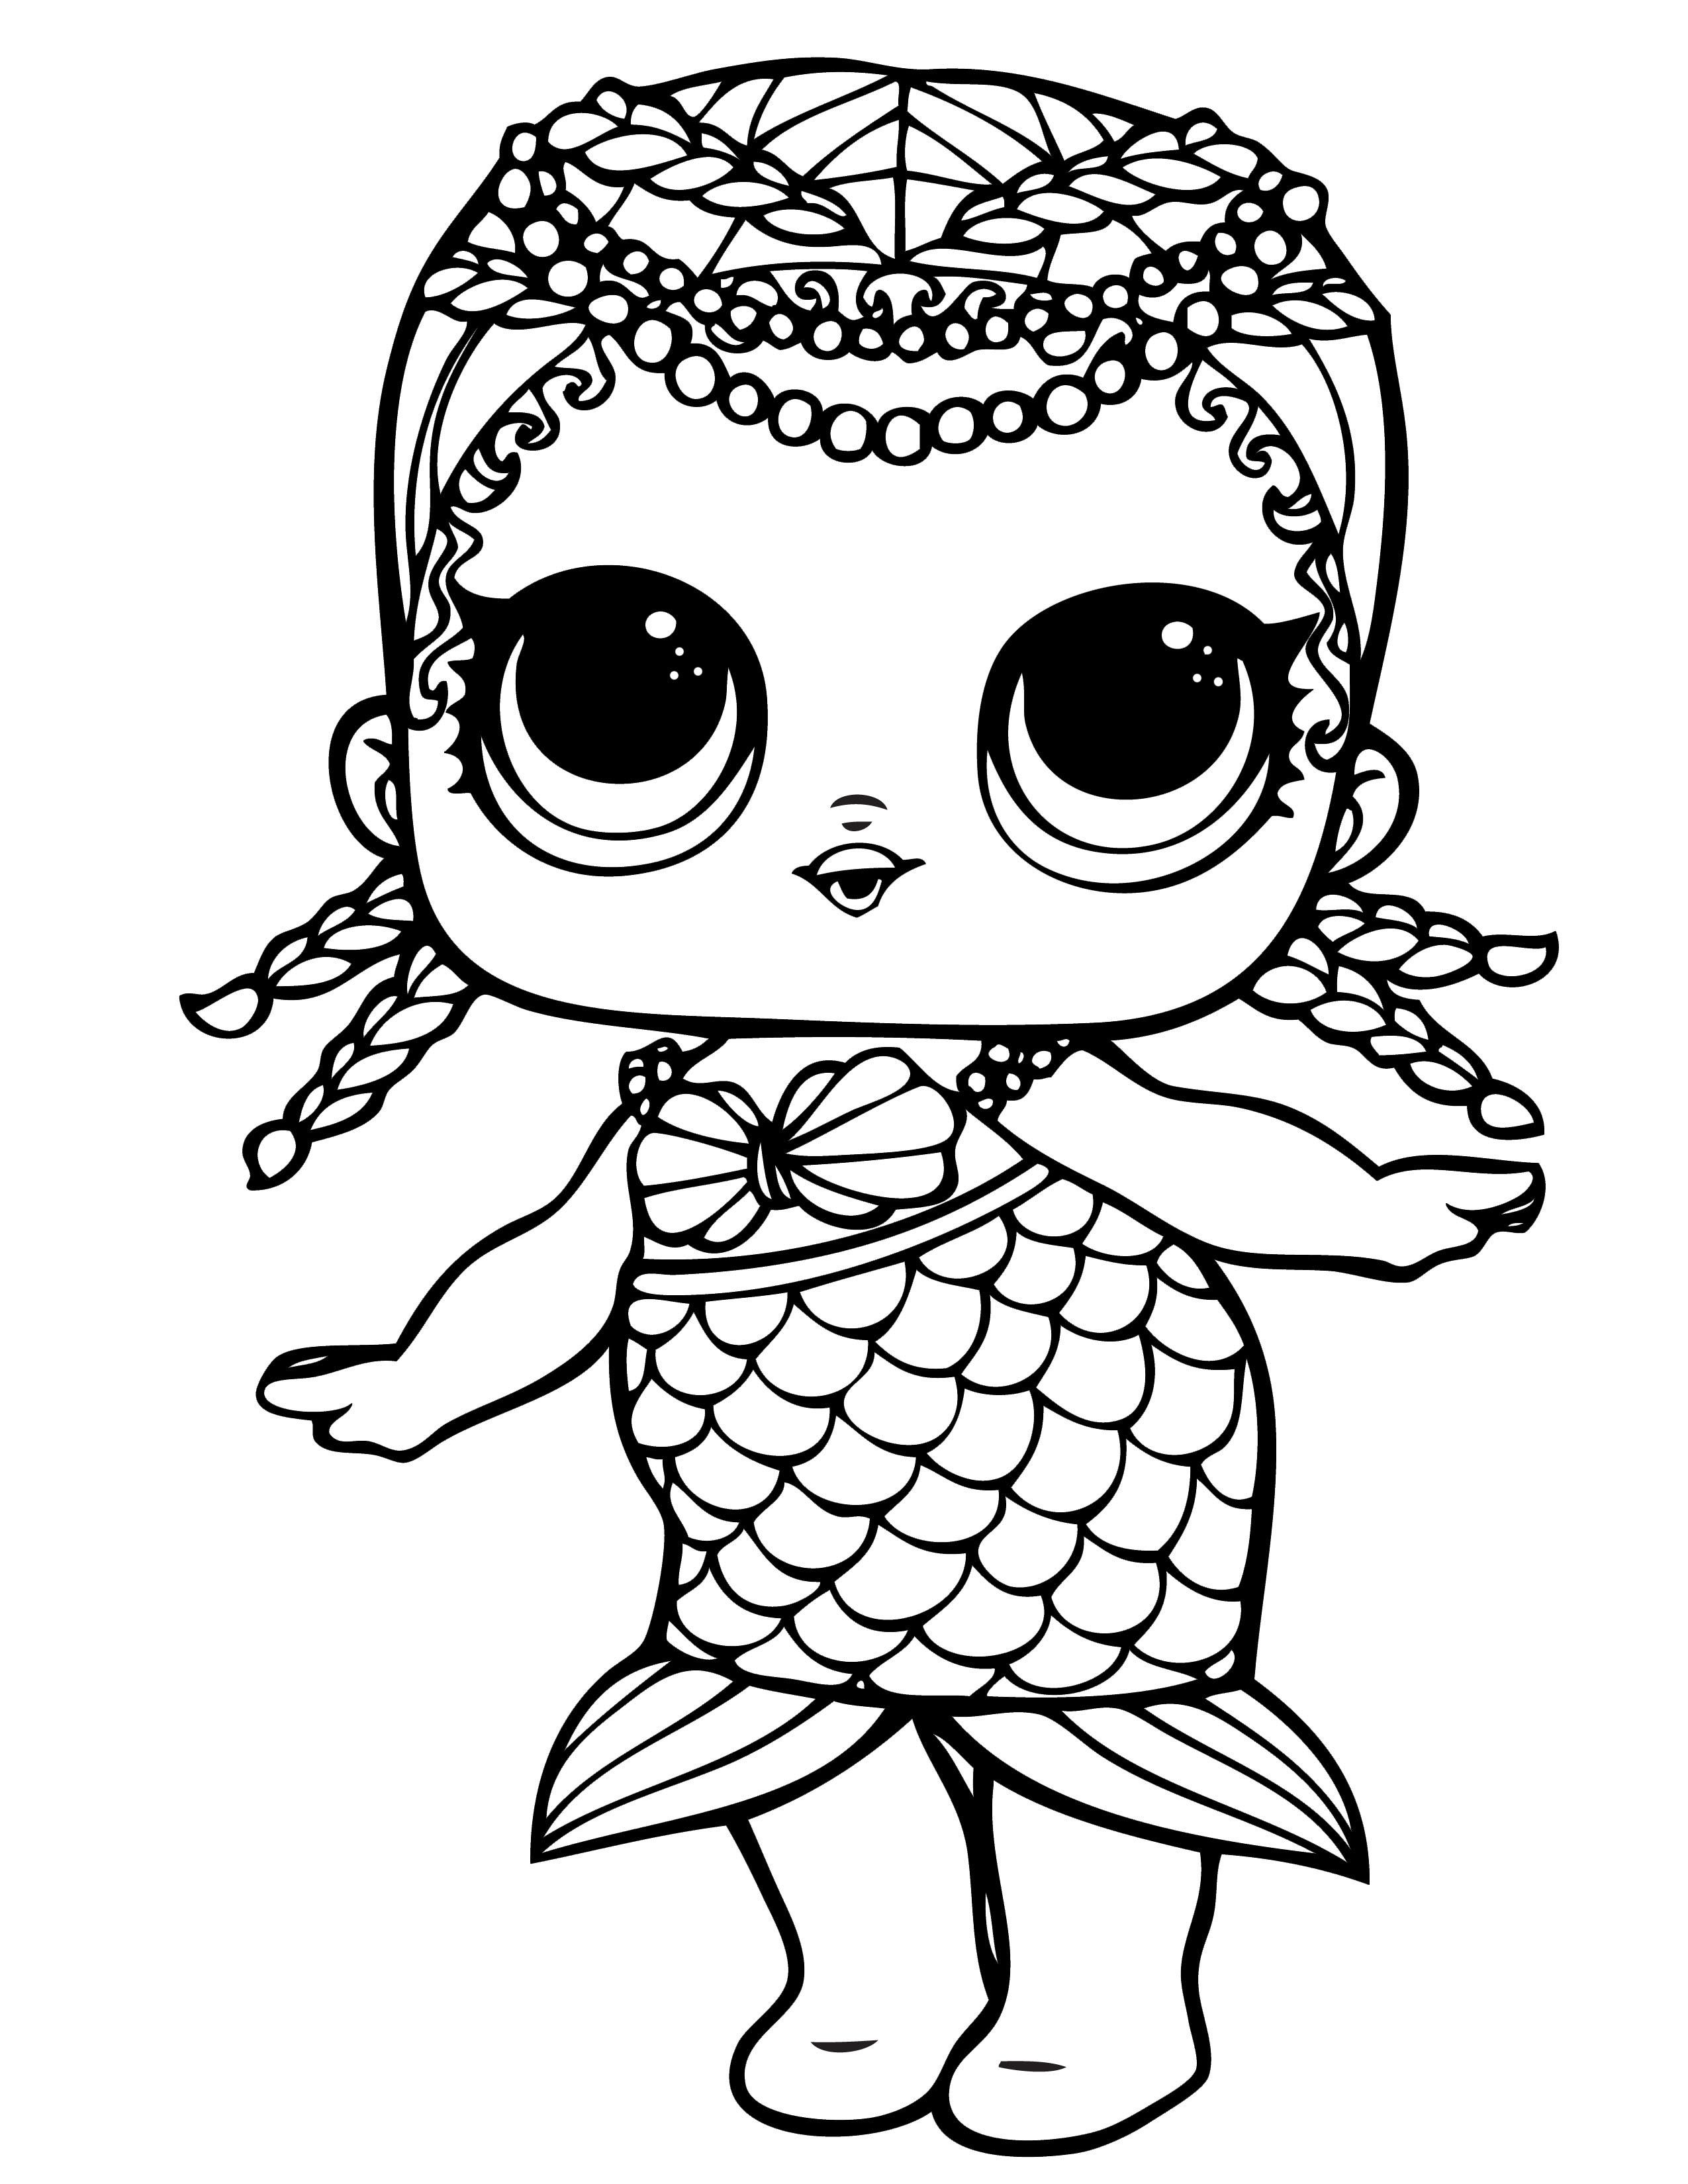 Printable LOL Doll Coloring Pages PDF - Coloringfolder.com  Unicorn  coloring pages, Mermaid coloring pages, Coloring pages